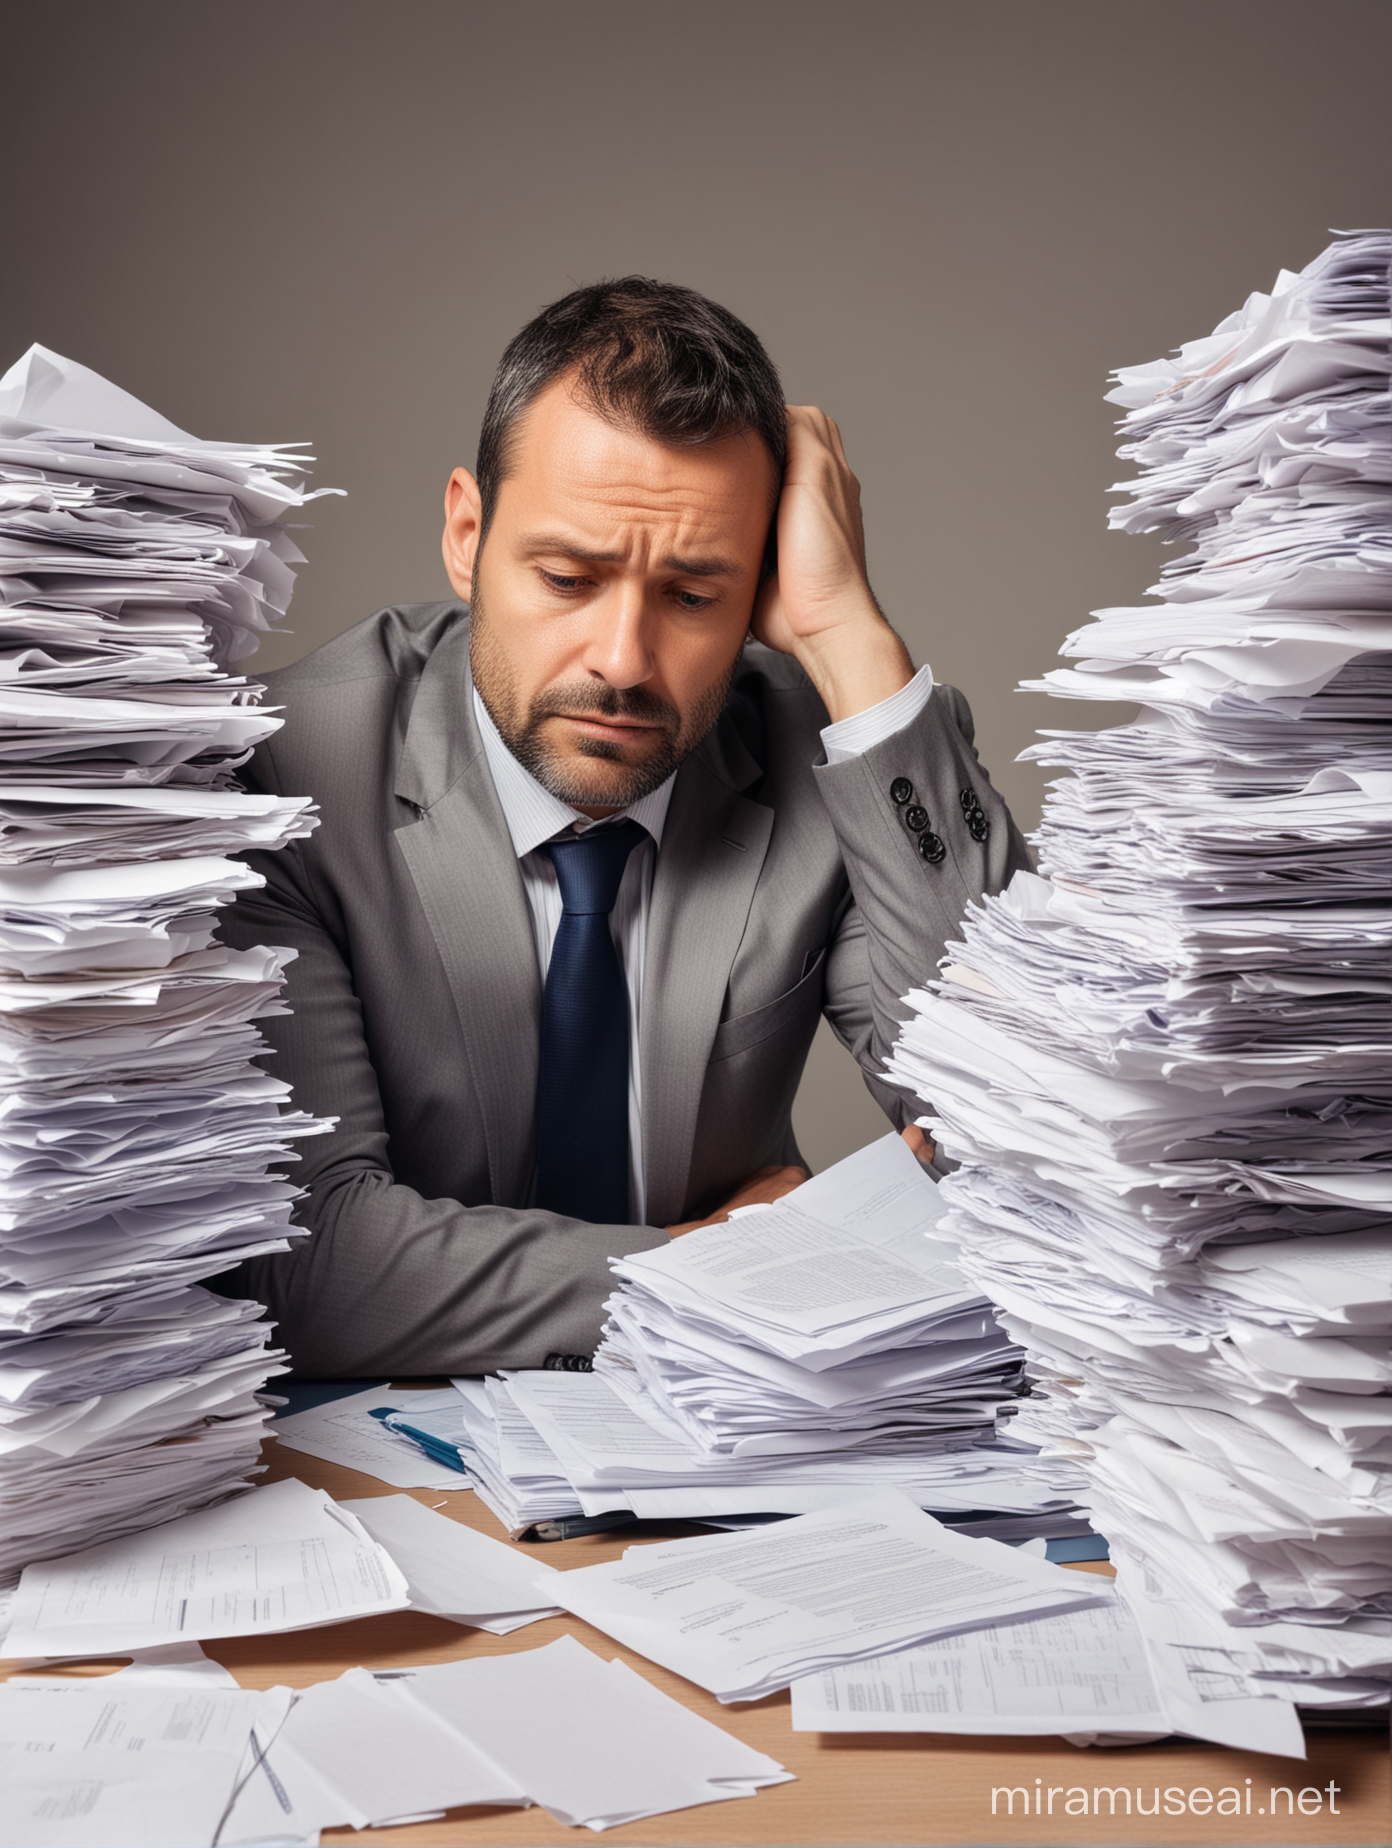 Overwhelmed Businessman Surrounded by Papers at Desk